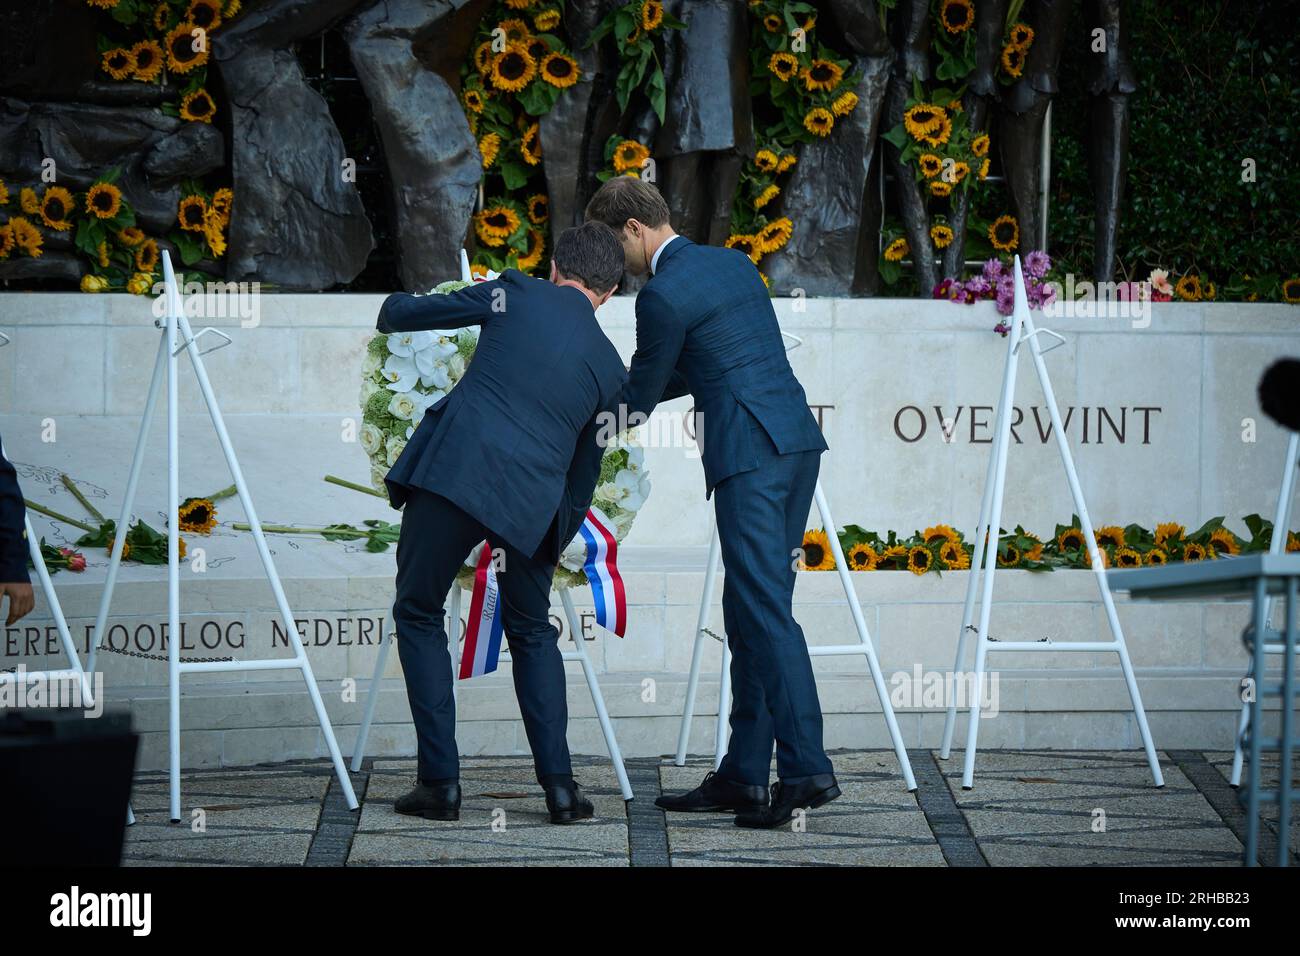 THE HAGUE - Outgoing Prime Minister Mark Rutte and Maarten van Ooijen, State Secretary for Youth and Prevention at the Indisch Monument during the National Commemoration of the capitulation of Japan on August 15, 1945. The Stichting Nationale Herdenking 15 Augustus 1945 annually organizes this commemoration in which all victims of the war against Japan and the Japanese occupation of the former Dutch East Indies are commemorated. ANP PHIL NIJHUIS netherlands out - belgium out Stock Photo